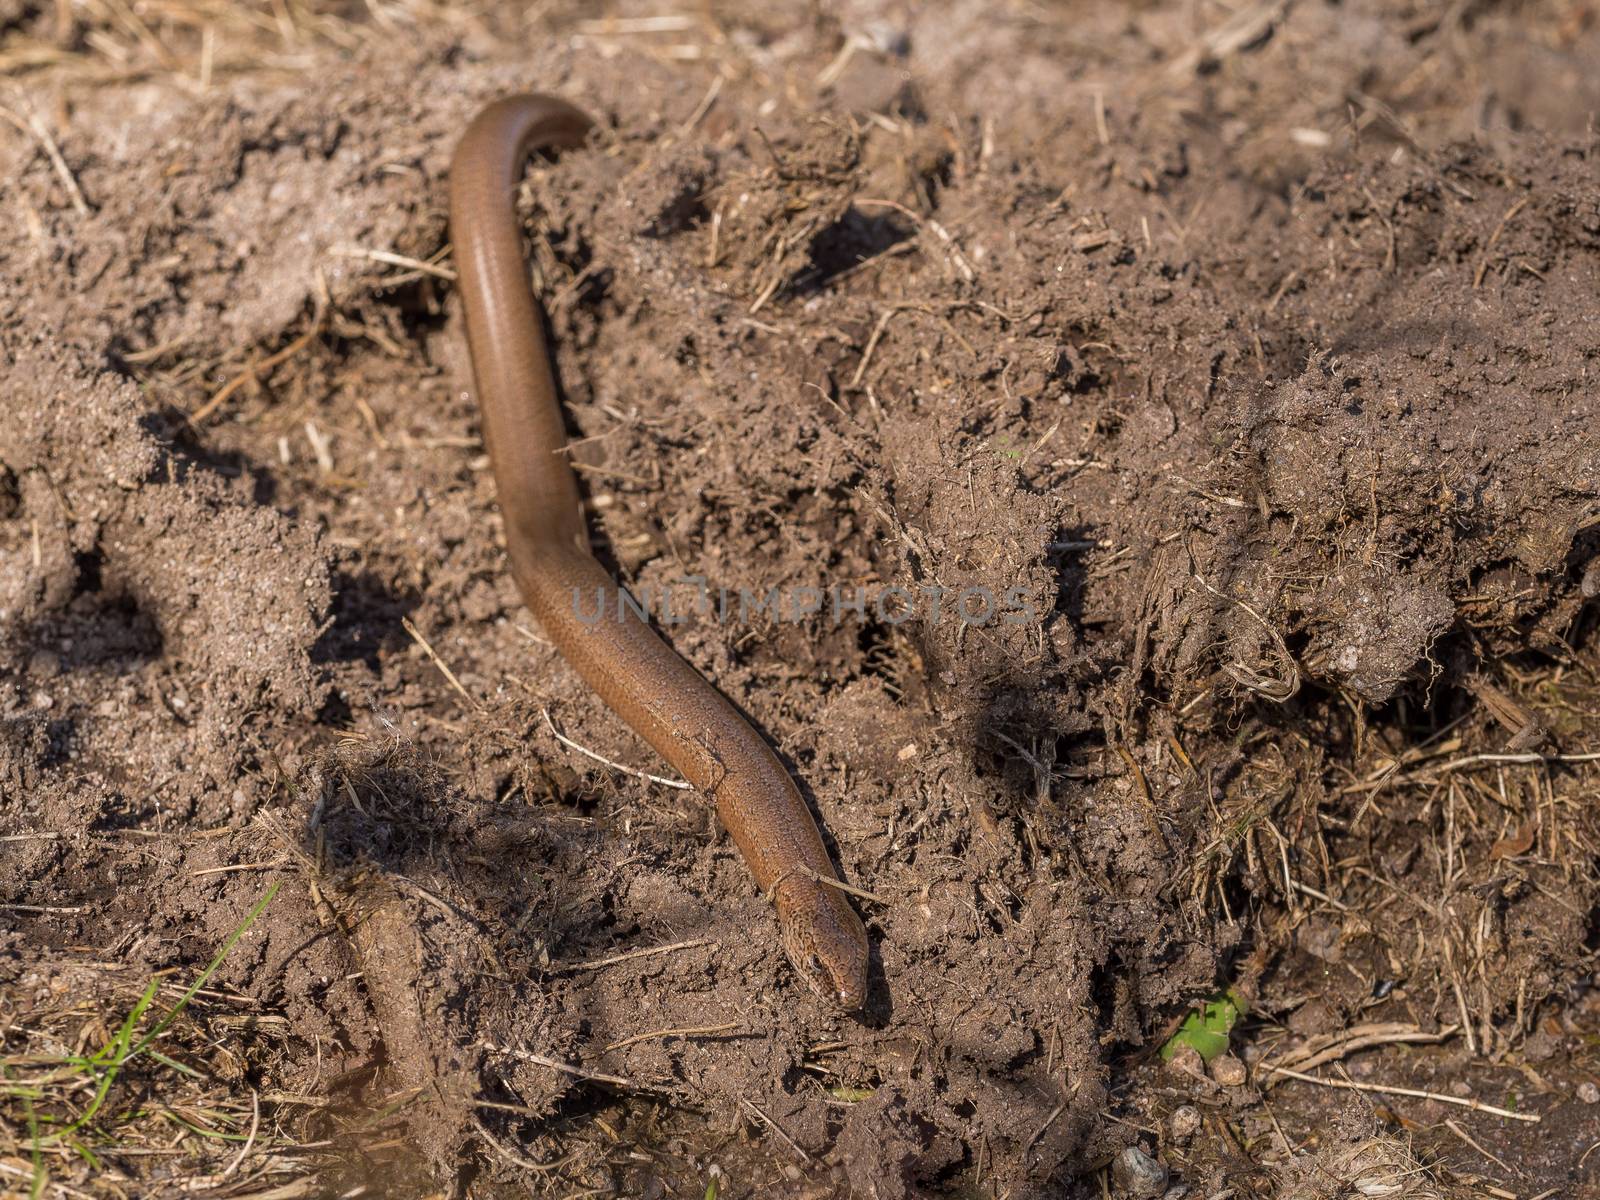 Common slowworm camouflaged on brown muddy soil